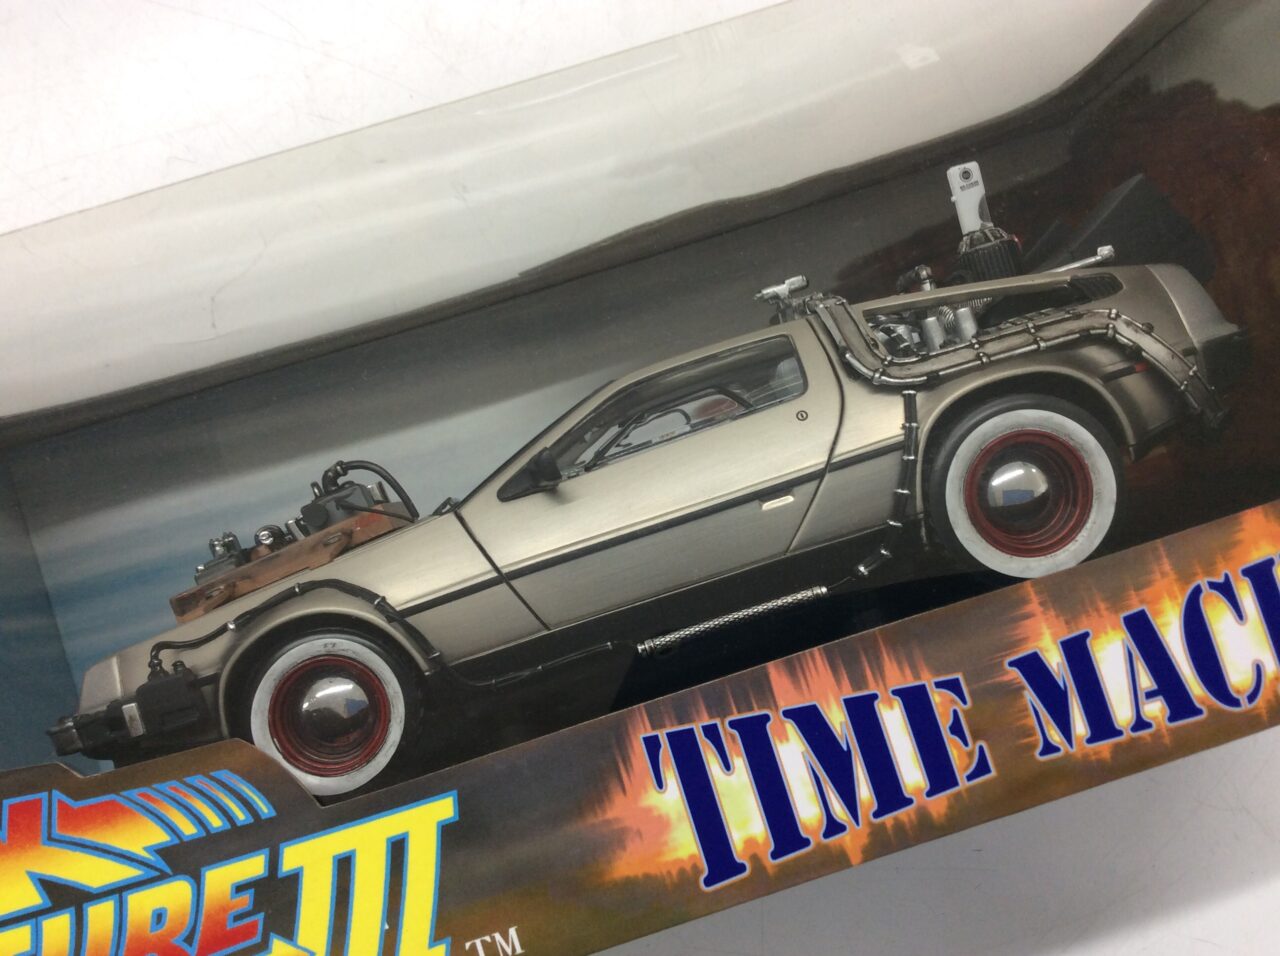 BACK TO THE FUTURE III デロリアン J-shop